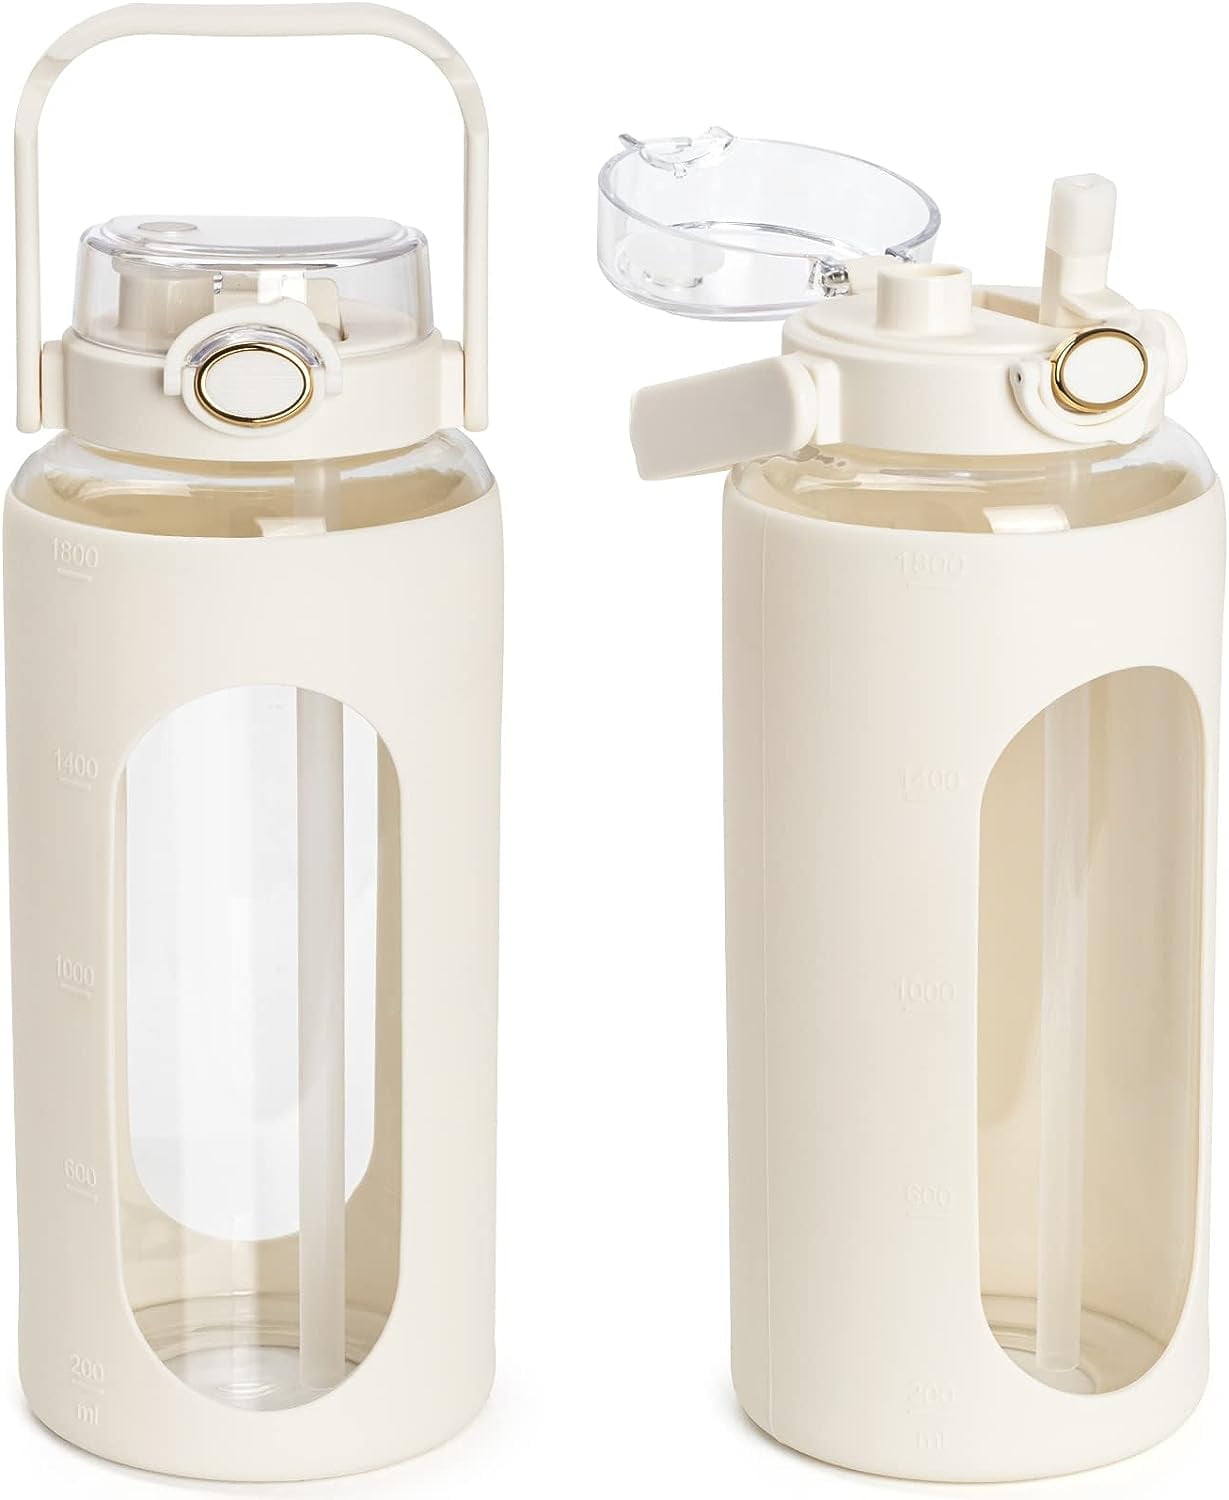 HAVEN & THE ETHEREAL GARDEN - BIG BOTTLE SIP KIT 1L (32 OZ) - Sip Kit:  Silicone Straw + Cap + Glass Water Bottle: 32oz